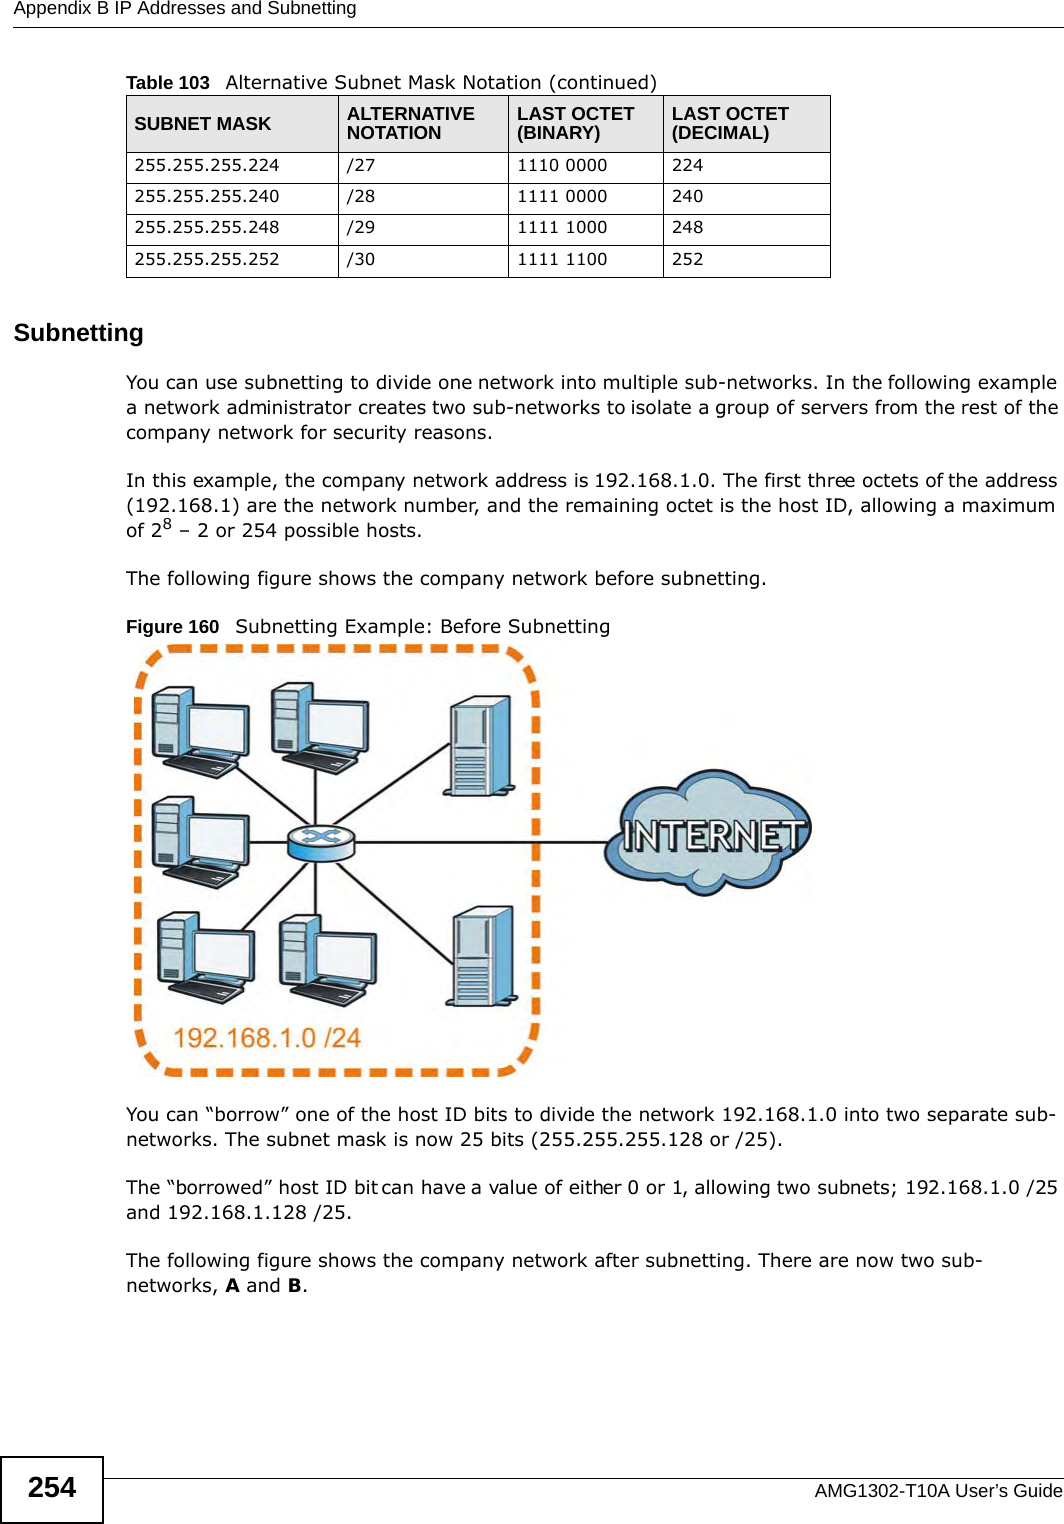 Appendix B IP Addresses and SubnettingAMG1302-T10A User’s Guide254SubnettingYou can use subnetting to divide one network into multiple sub-networks. In the following example a network administrator creates two sub-networks to isolate a group of servers from the rest of the company network for security reasons.In this example, the company network address is 192.168.1.0. The first three octets of the address (192.168.1) are the network number, and the remaining octet is the host ID, allowing a maximum of 28 – 2 or 254 possible hosts.The following figure shows the company network before subnetting.  Figure 160   Subnetting Example: Before SubnettingYou can “borrow” one of the host ID bits to divide the network 192.168.1.0 into two separate sub-networks. The subnet mask is now 25 bits (255.255.255.128 or /25).The “borrowed” host ID bit can have a value of either 0 or 1, allowing two subnets; 192.168.1.0 /25 and 192.168.1.128 /25. The following figure shows the company network after subnetting. There are now two sub-networks, A and B. 255.255.255.224 /27 1110 0000 224255.255.255.240 /28 1111 0000 240255.255.255.248 /29 1111 1000 248255.255.255.252 /30 1111 1100 252Table 103   Alternative Subnet Mask Notation (continued)SUBNET MASK ALTERNATIVE NOTATION LAST OCTET (BINARY) LAST OCTET (DECIMAL)